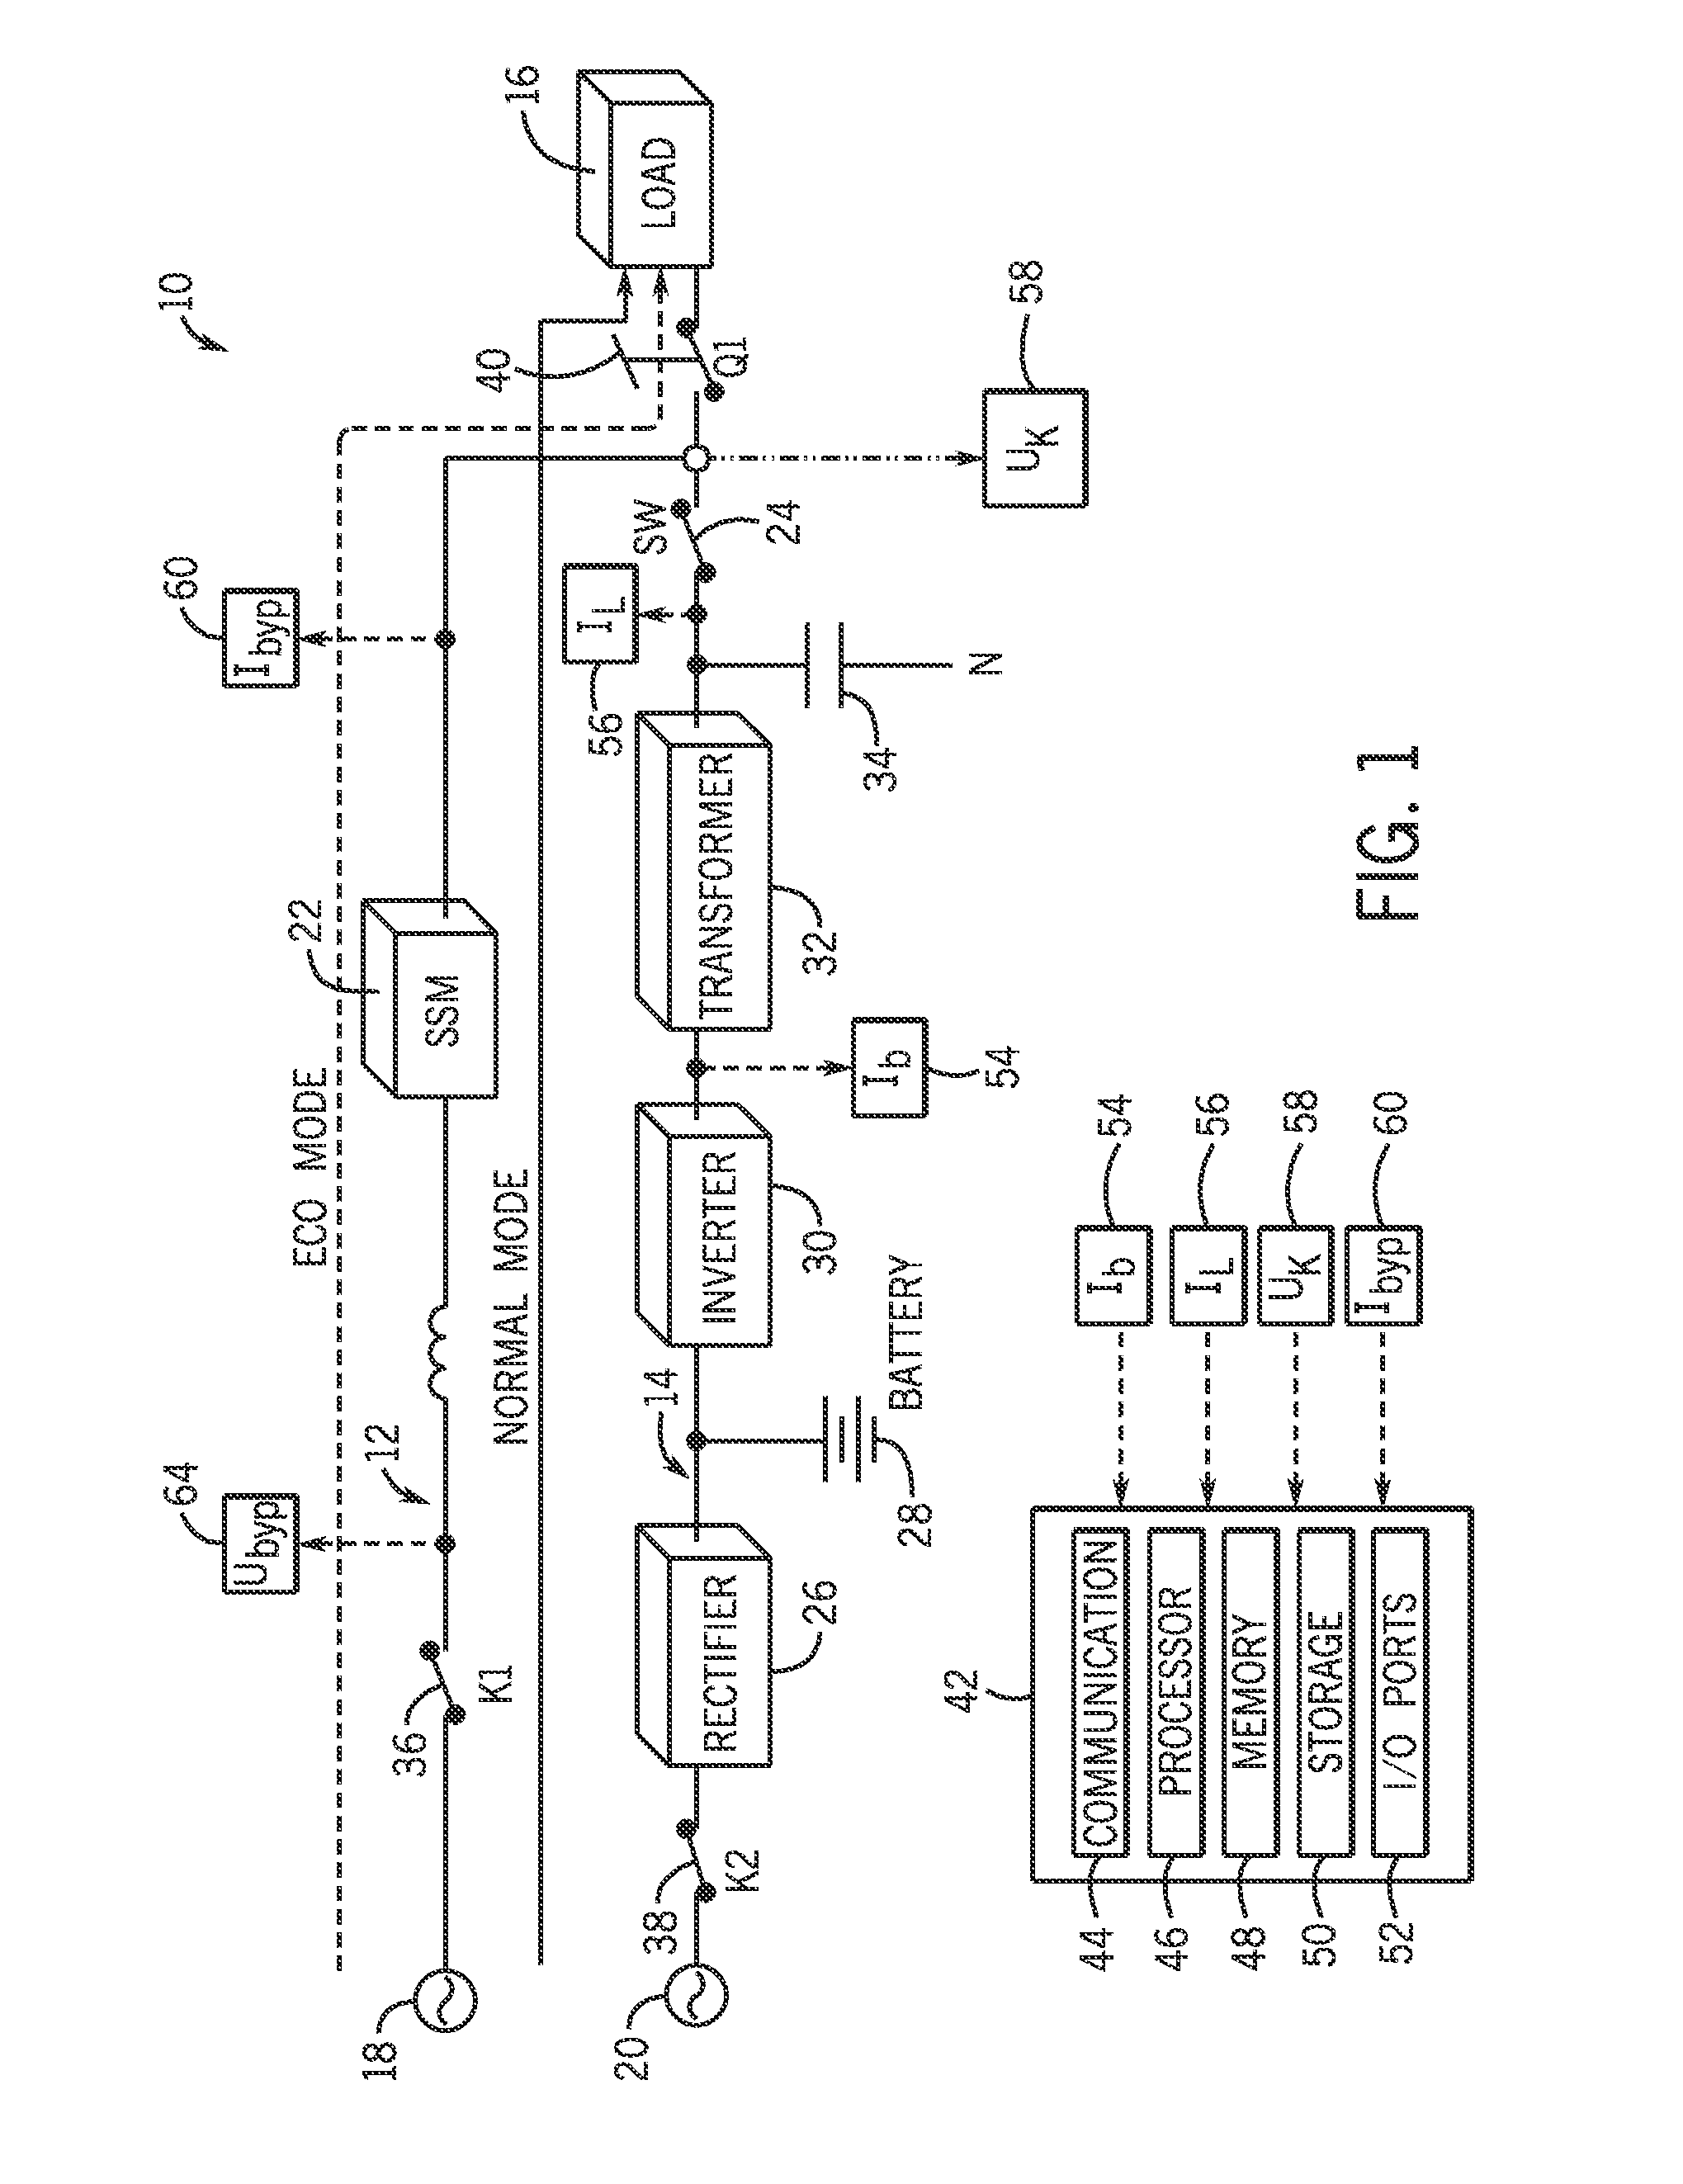 Systems and methods for detecting power quality of uninterrupible power supplies